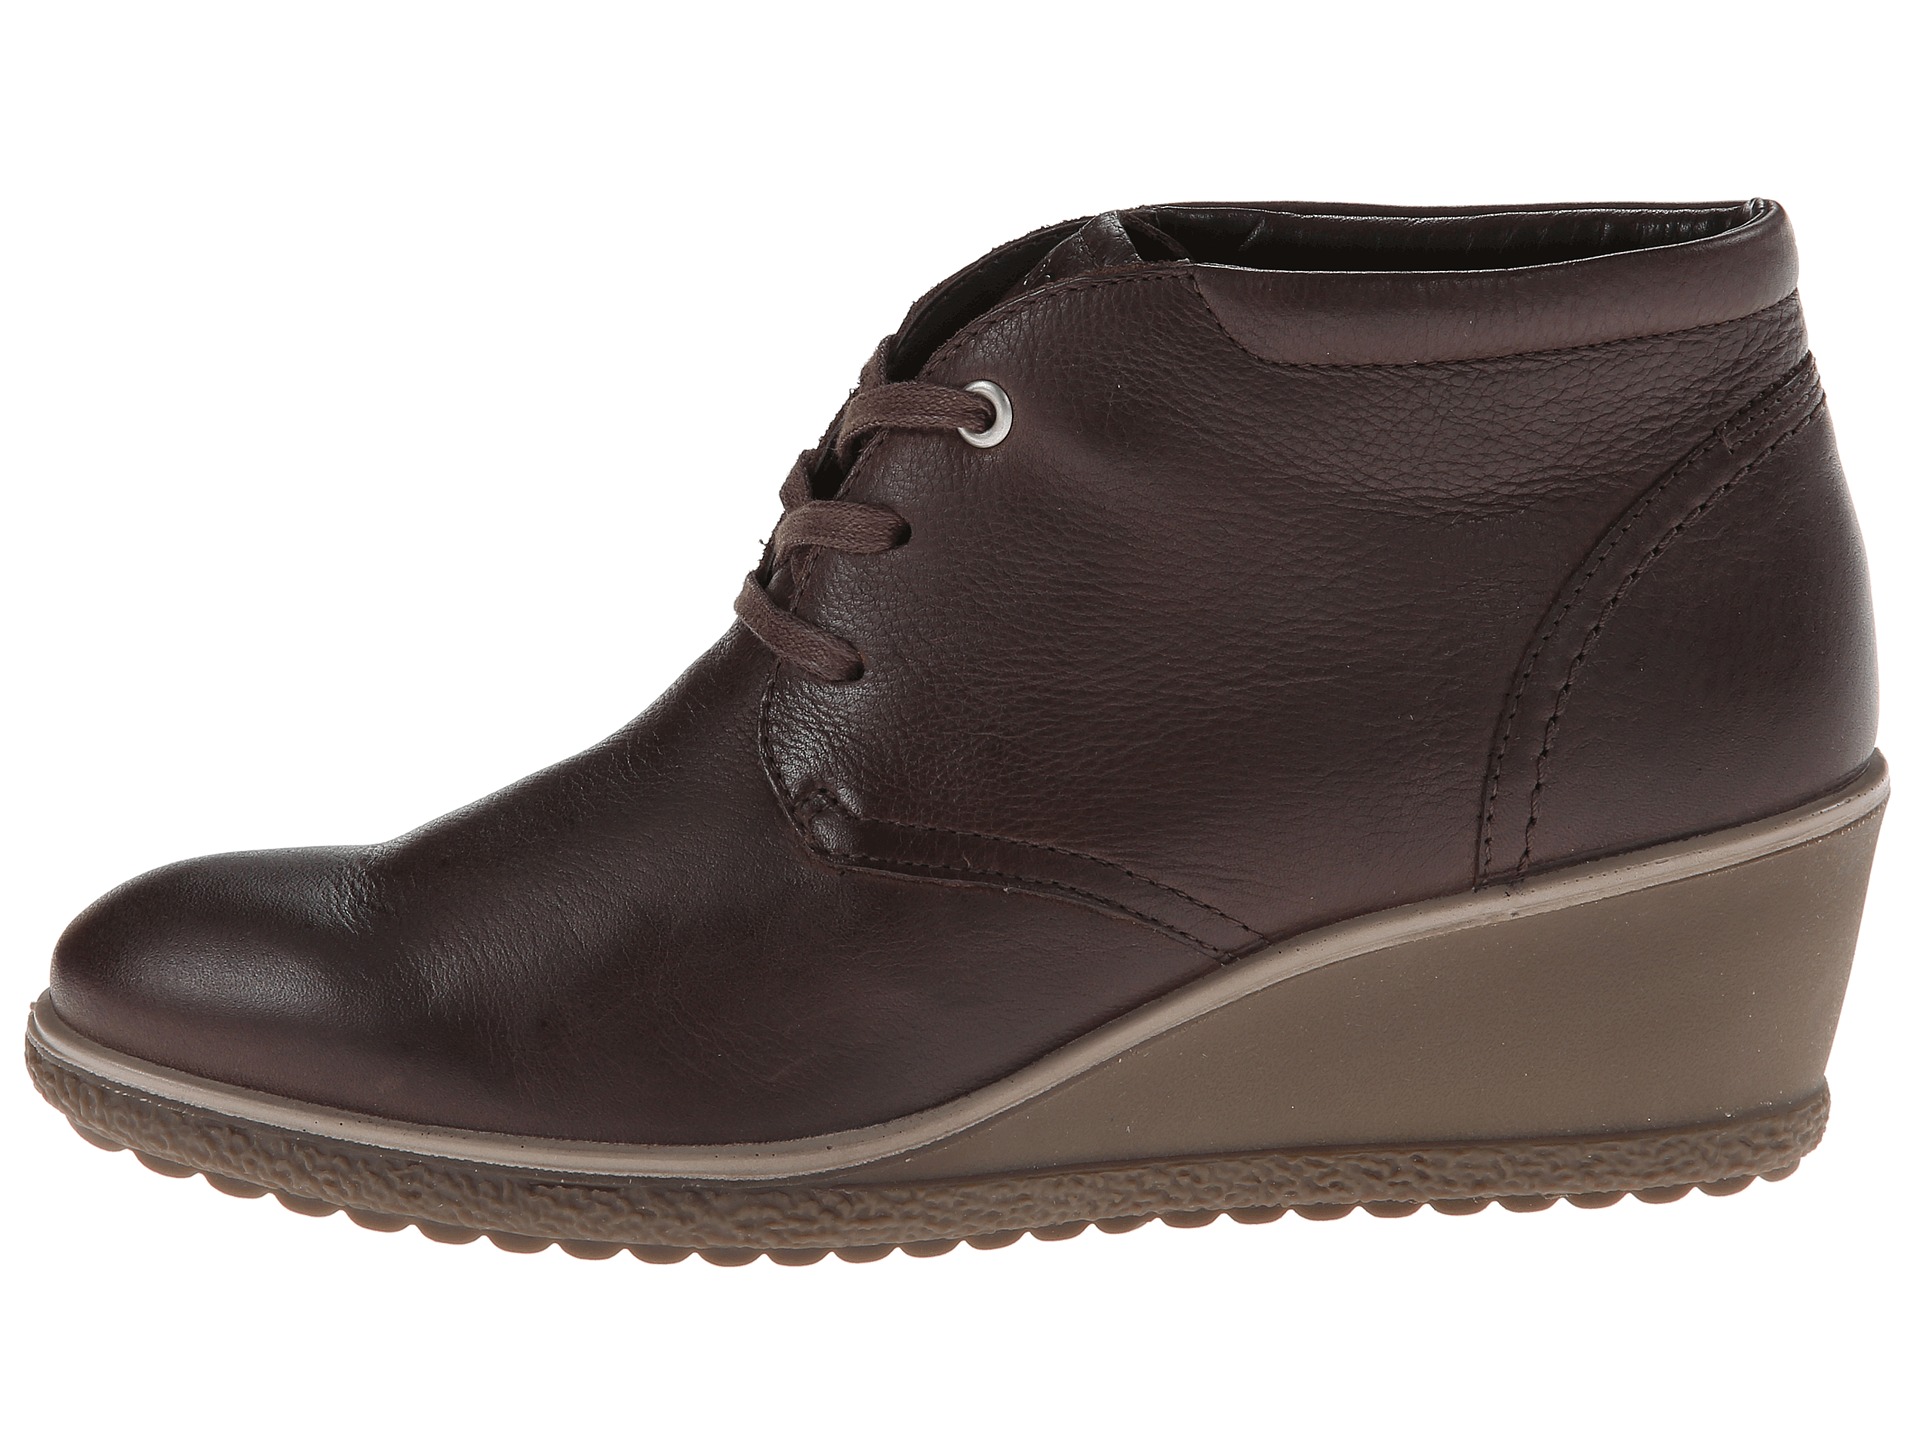 Ecco Camilla Wedge Ankle Boot, Shoes | Shipped Free at Zappos